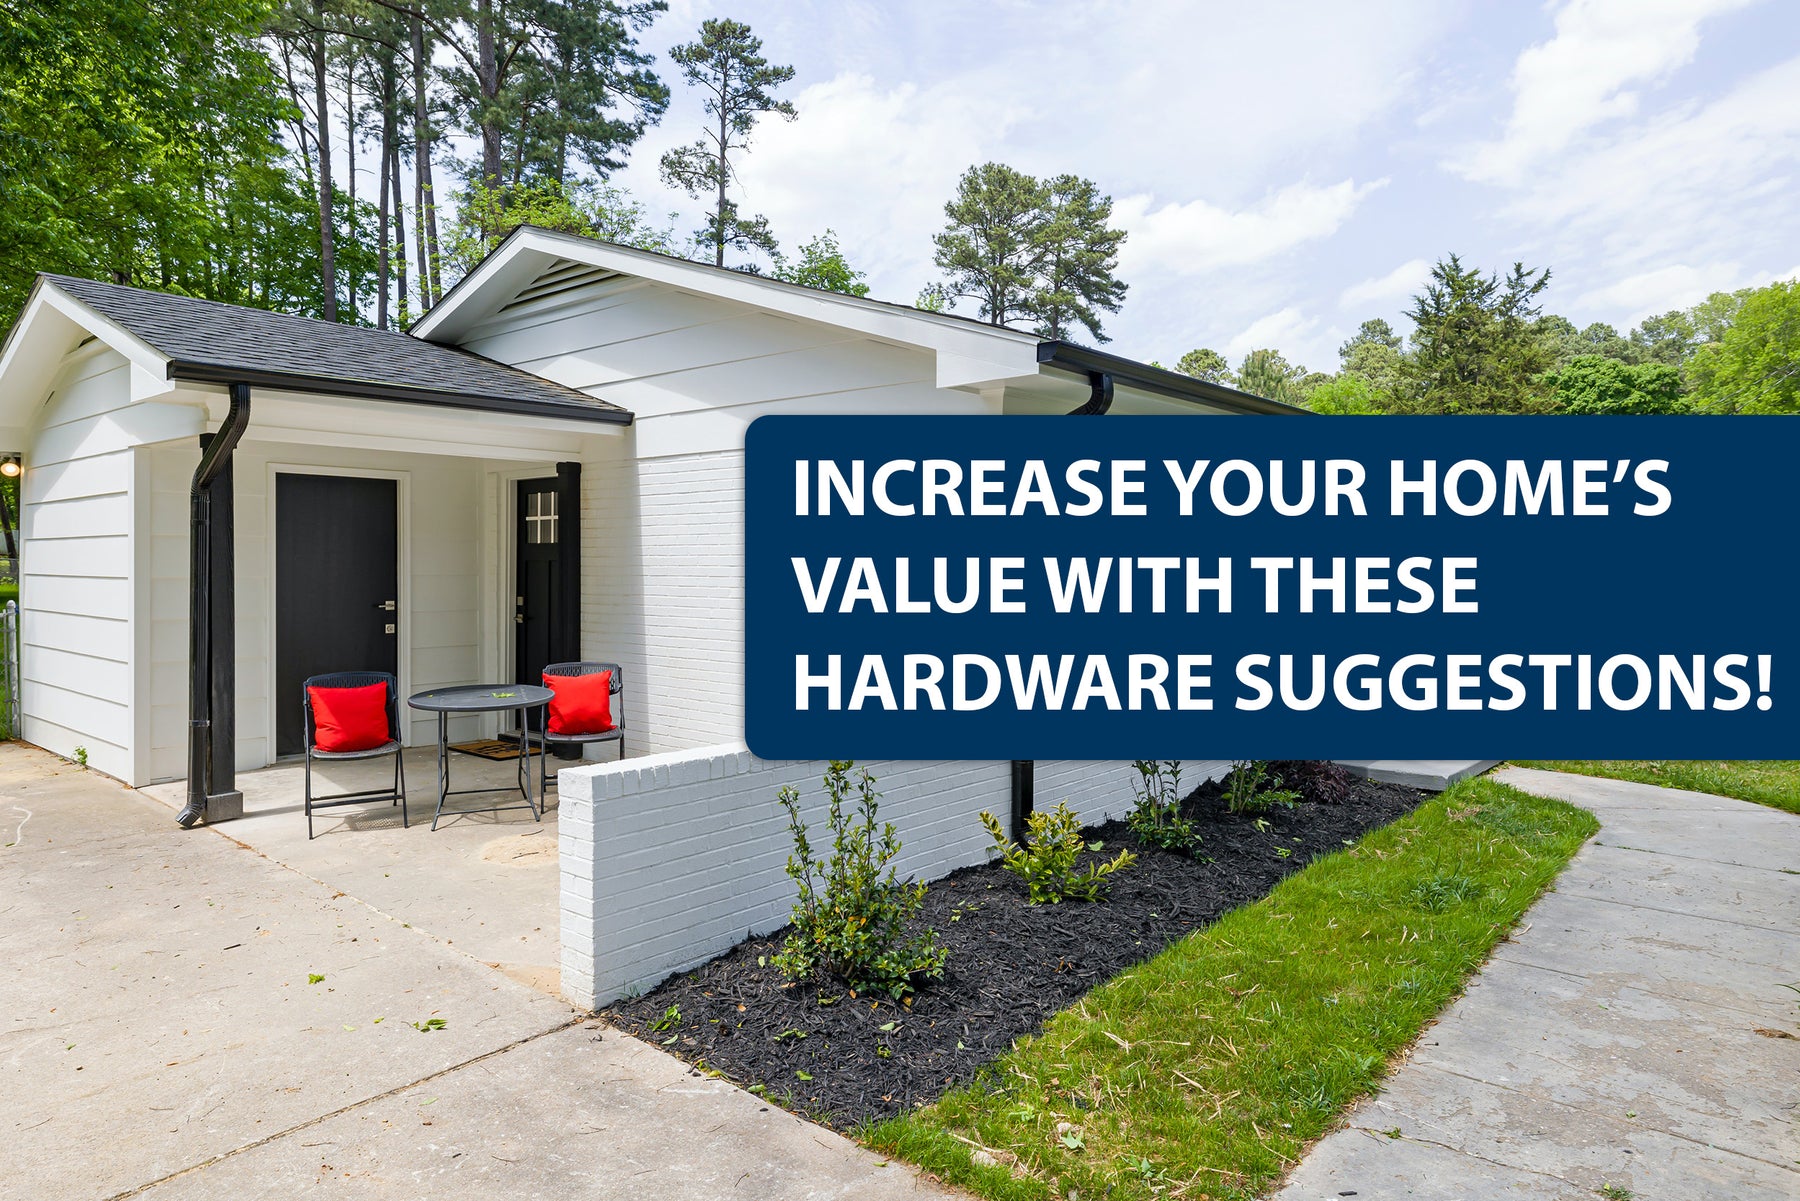 Increase Your Home’s Value with These Hardware Suggestions!